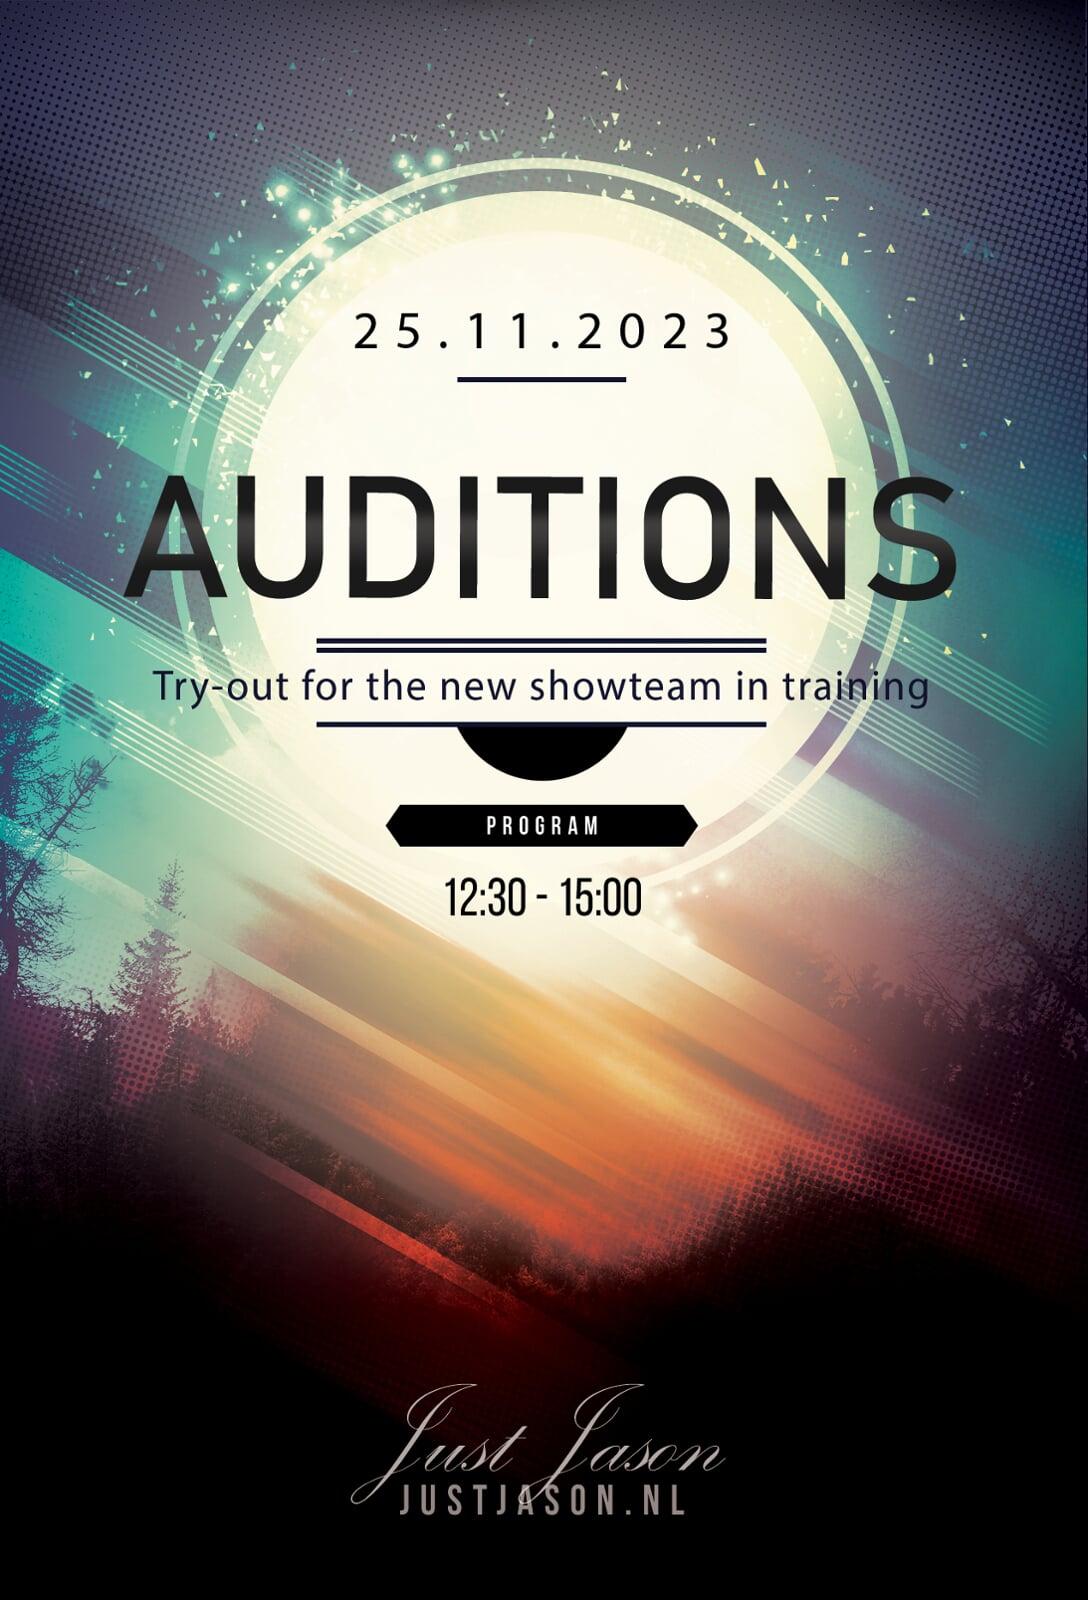 Auditions!